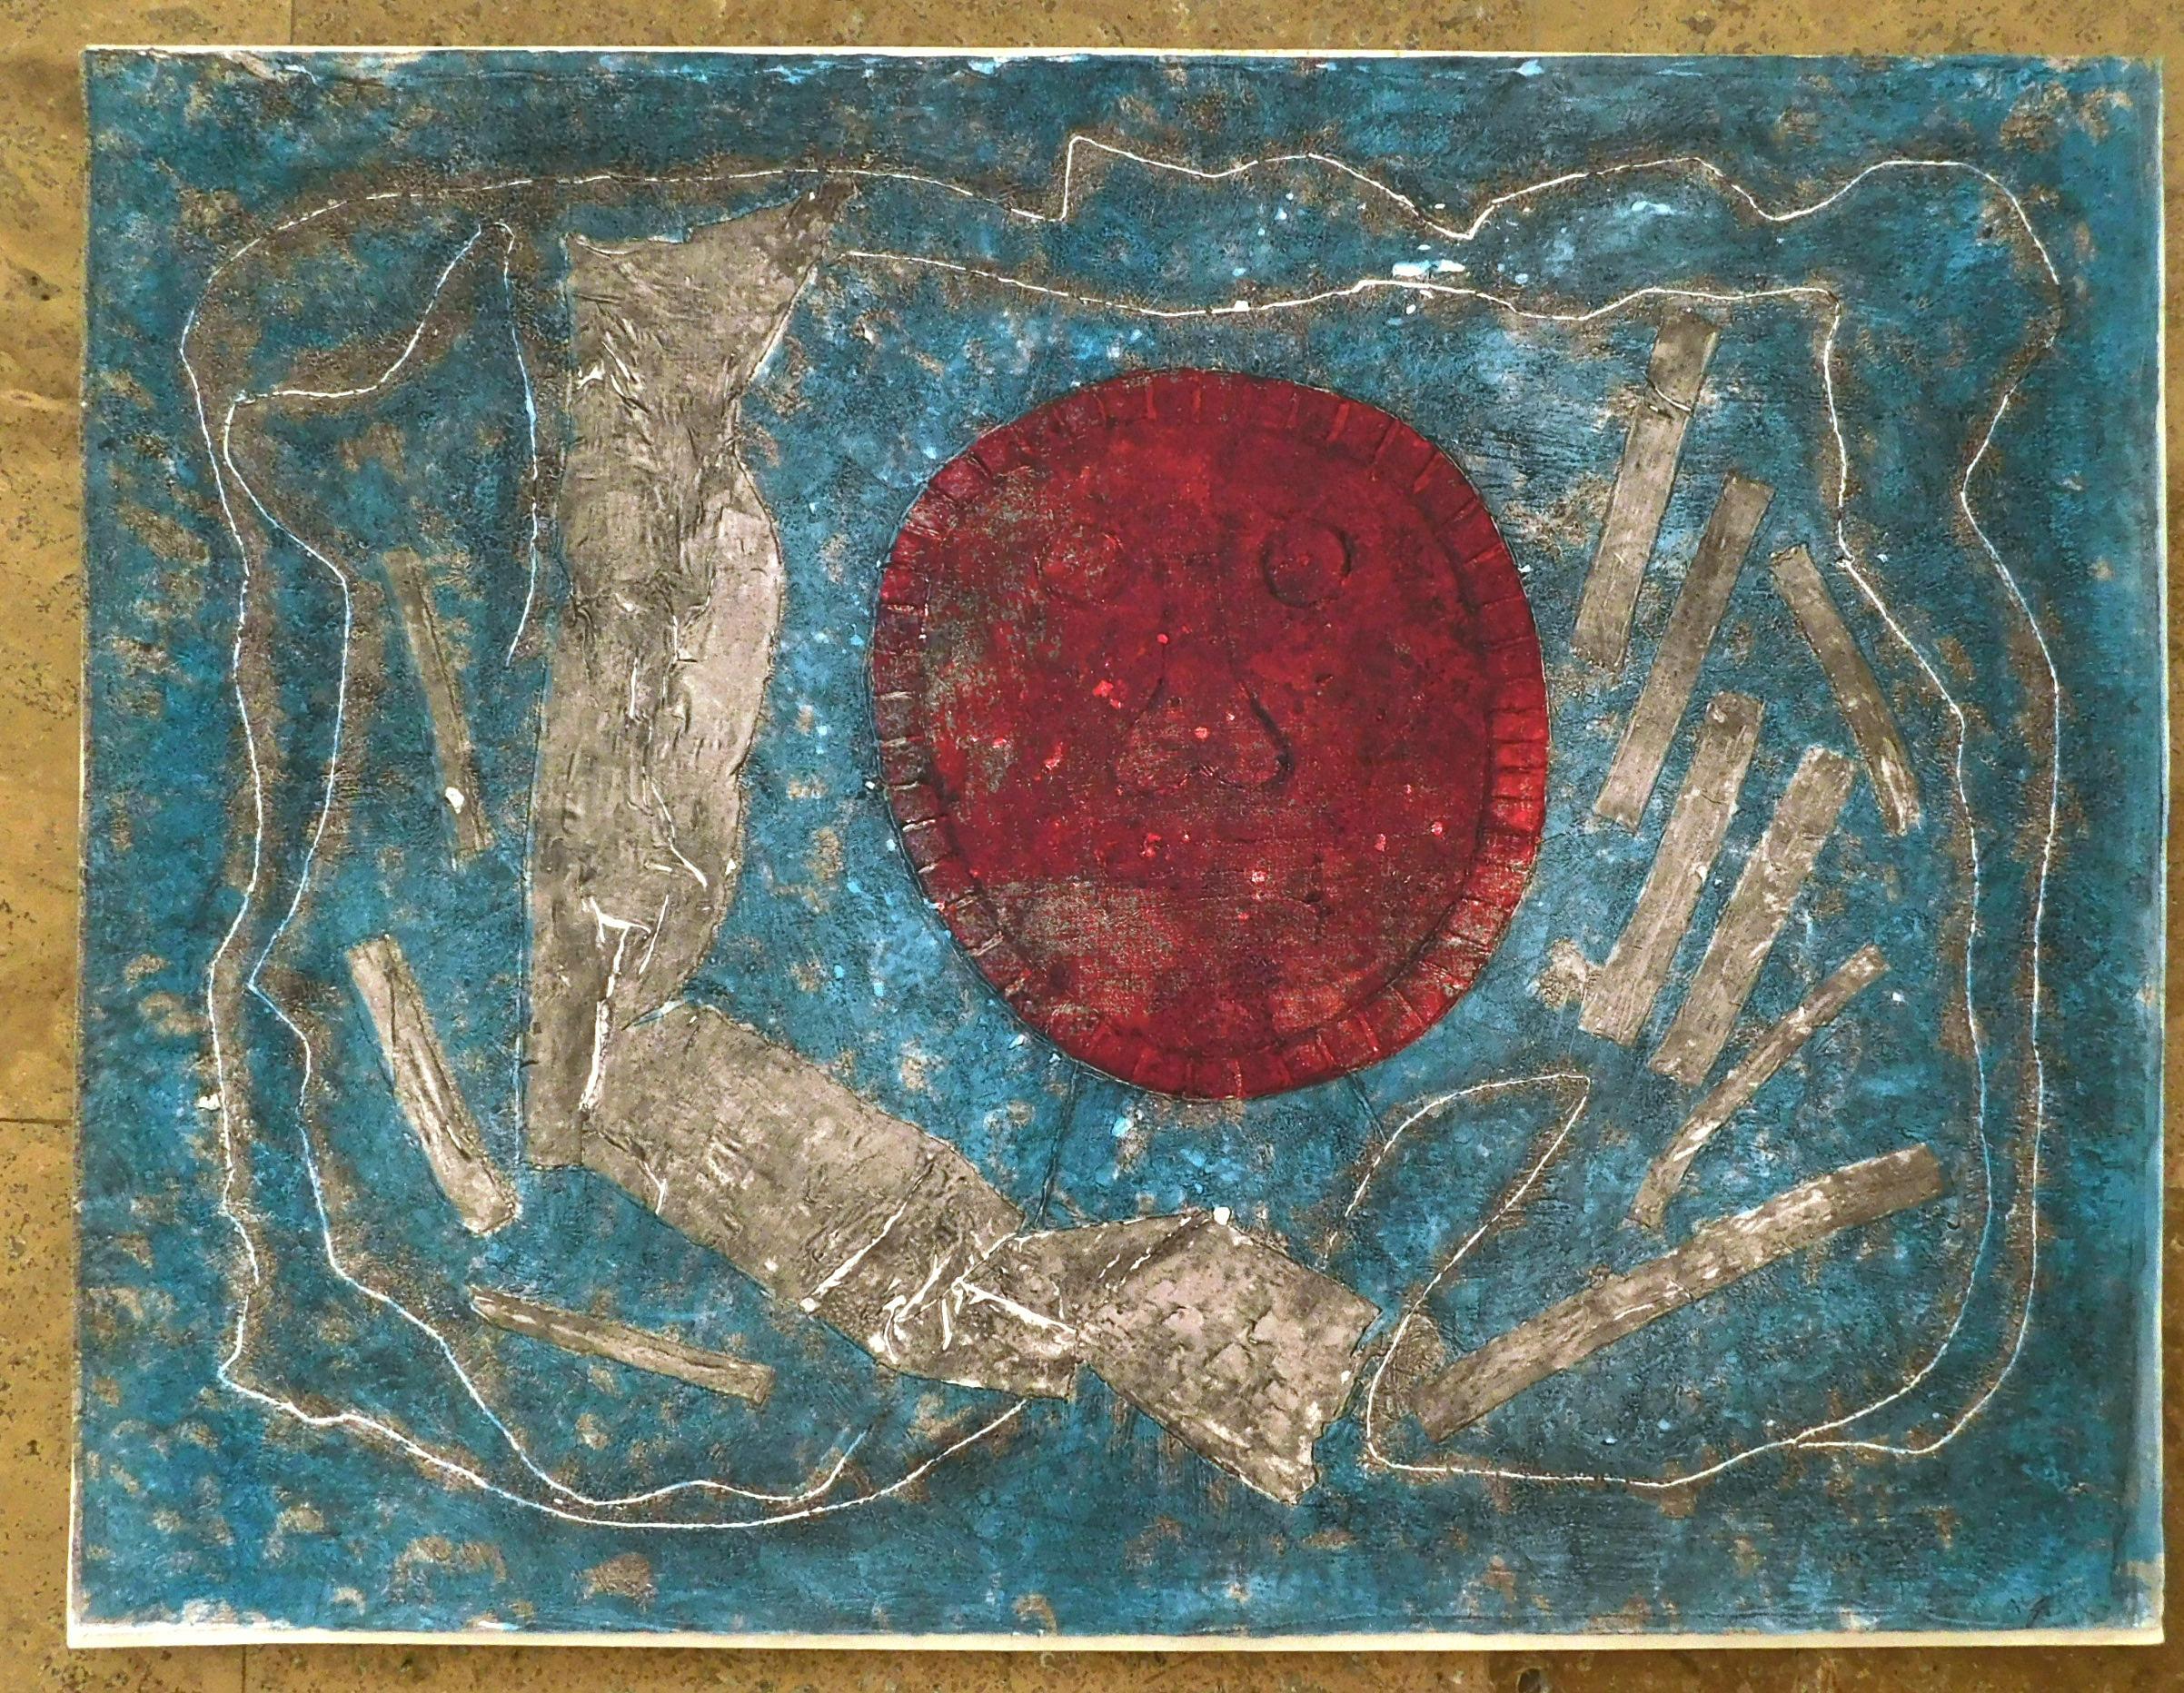 Mixografia on Paper “Sol (The Sun)” by well-known Mexico artist Rufino Tamayo (1891-1991).
Signed “R. Tamayo” lower right. Numbered lower left 96/140. Created 1976.
In excellent condition. Measures: 22 ½ x 29 3/4. Published by TransWorld Art, New